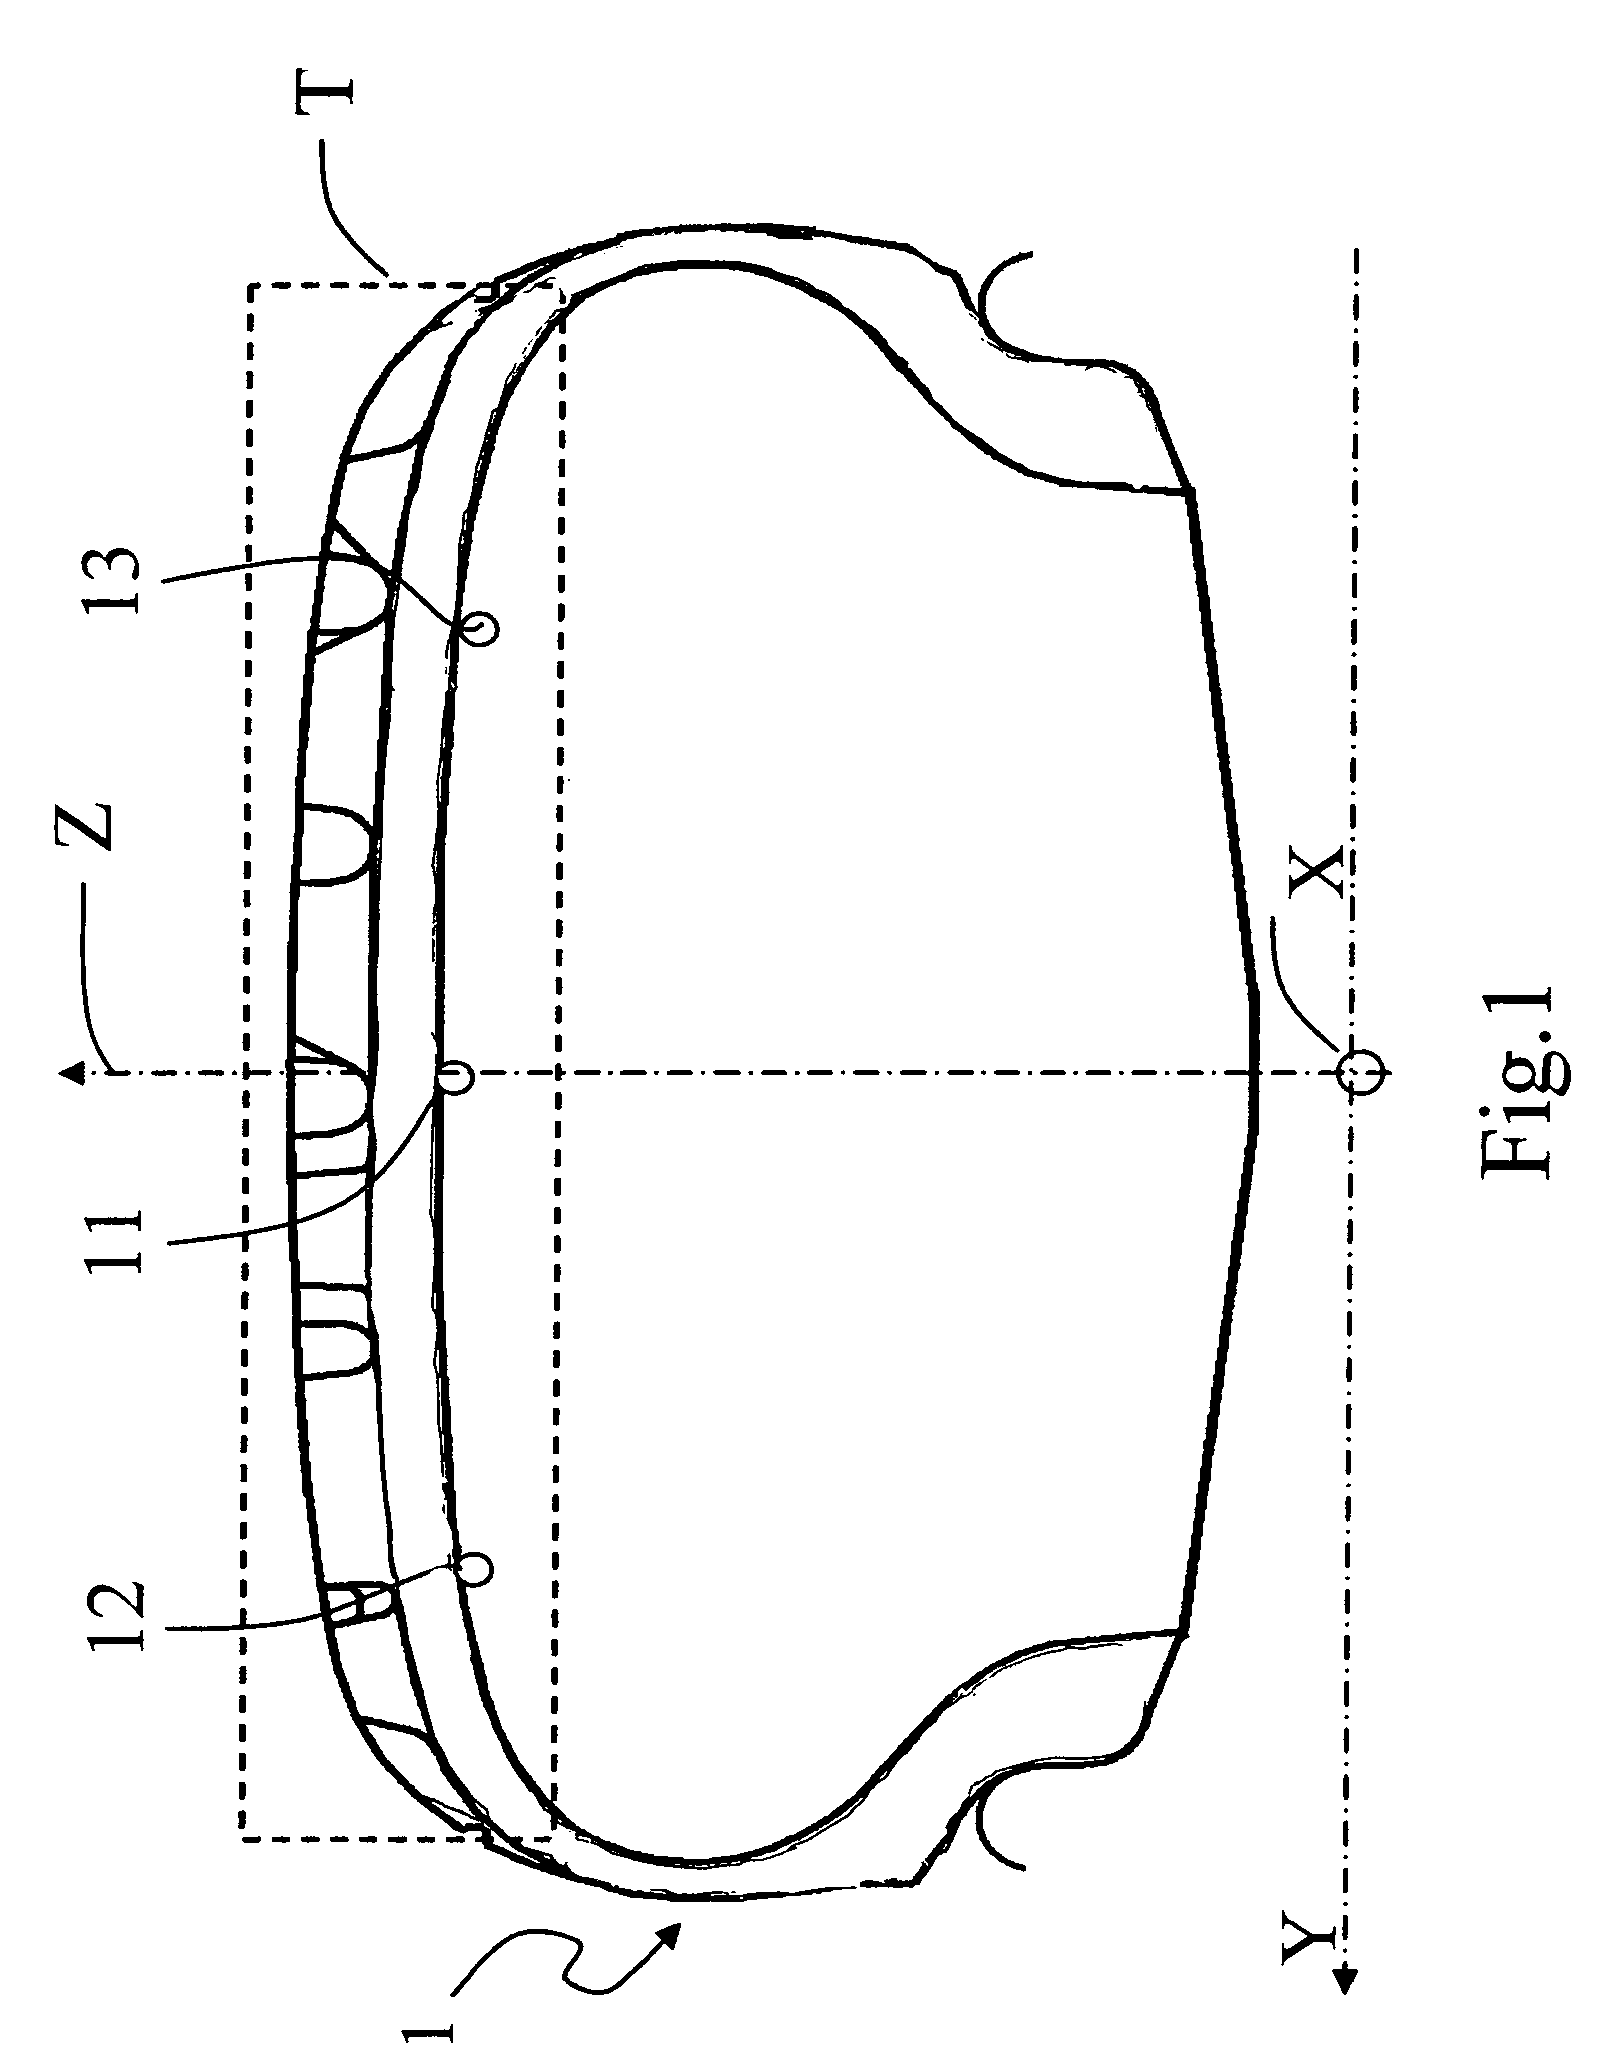 Method and system for managing data transmission from a plurality of sensor devices included in a tyre